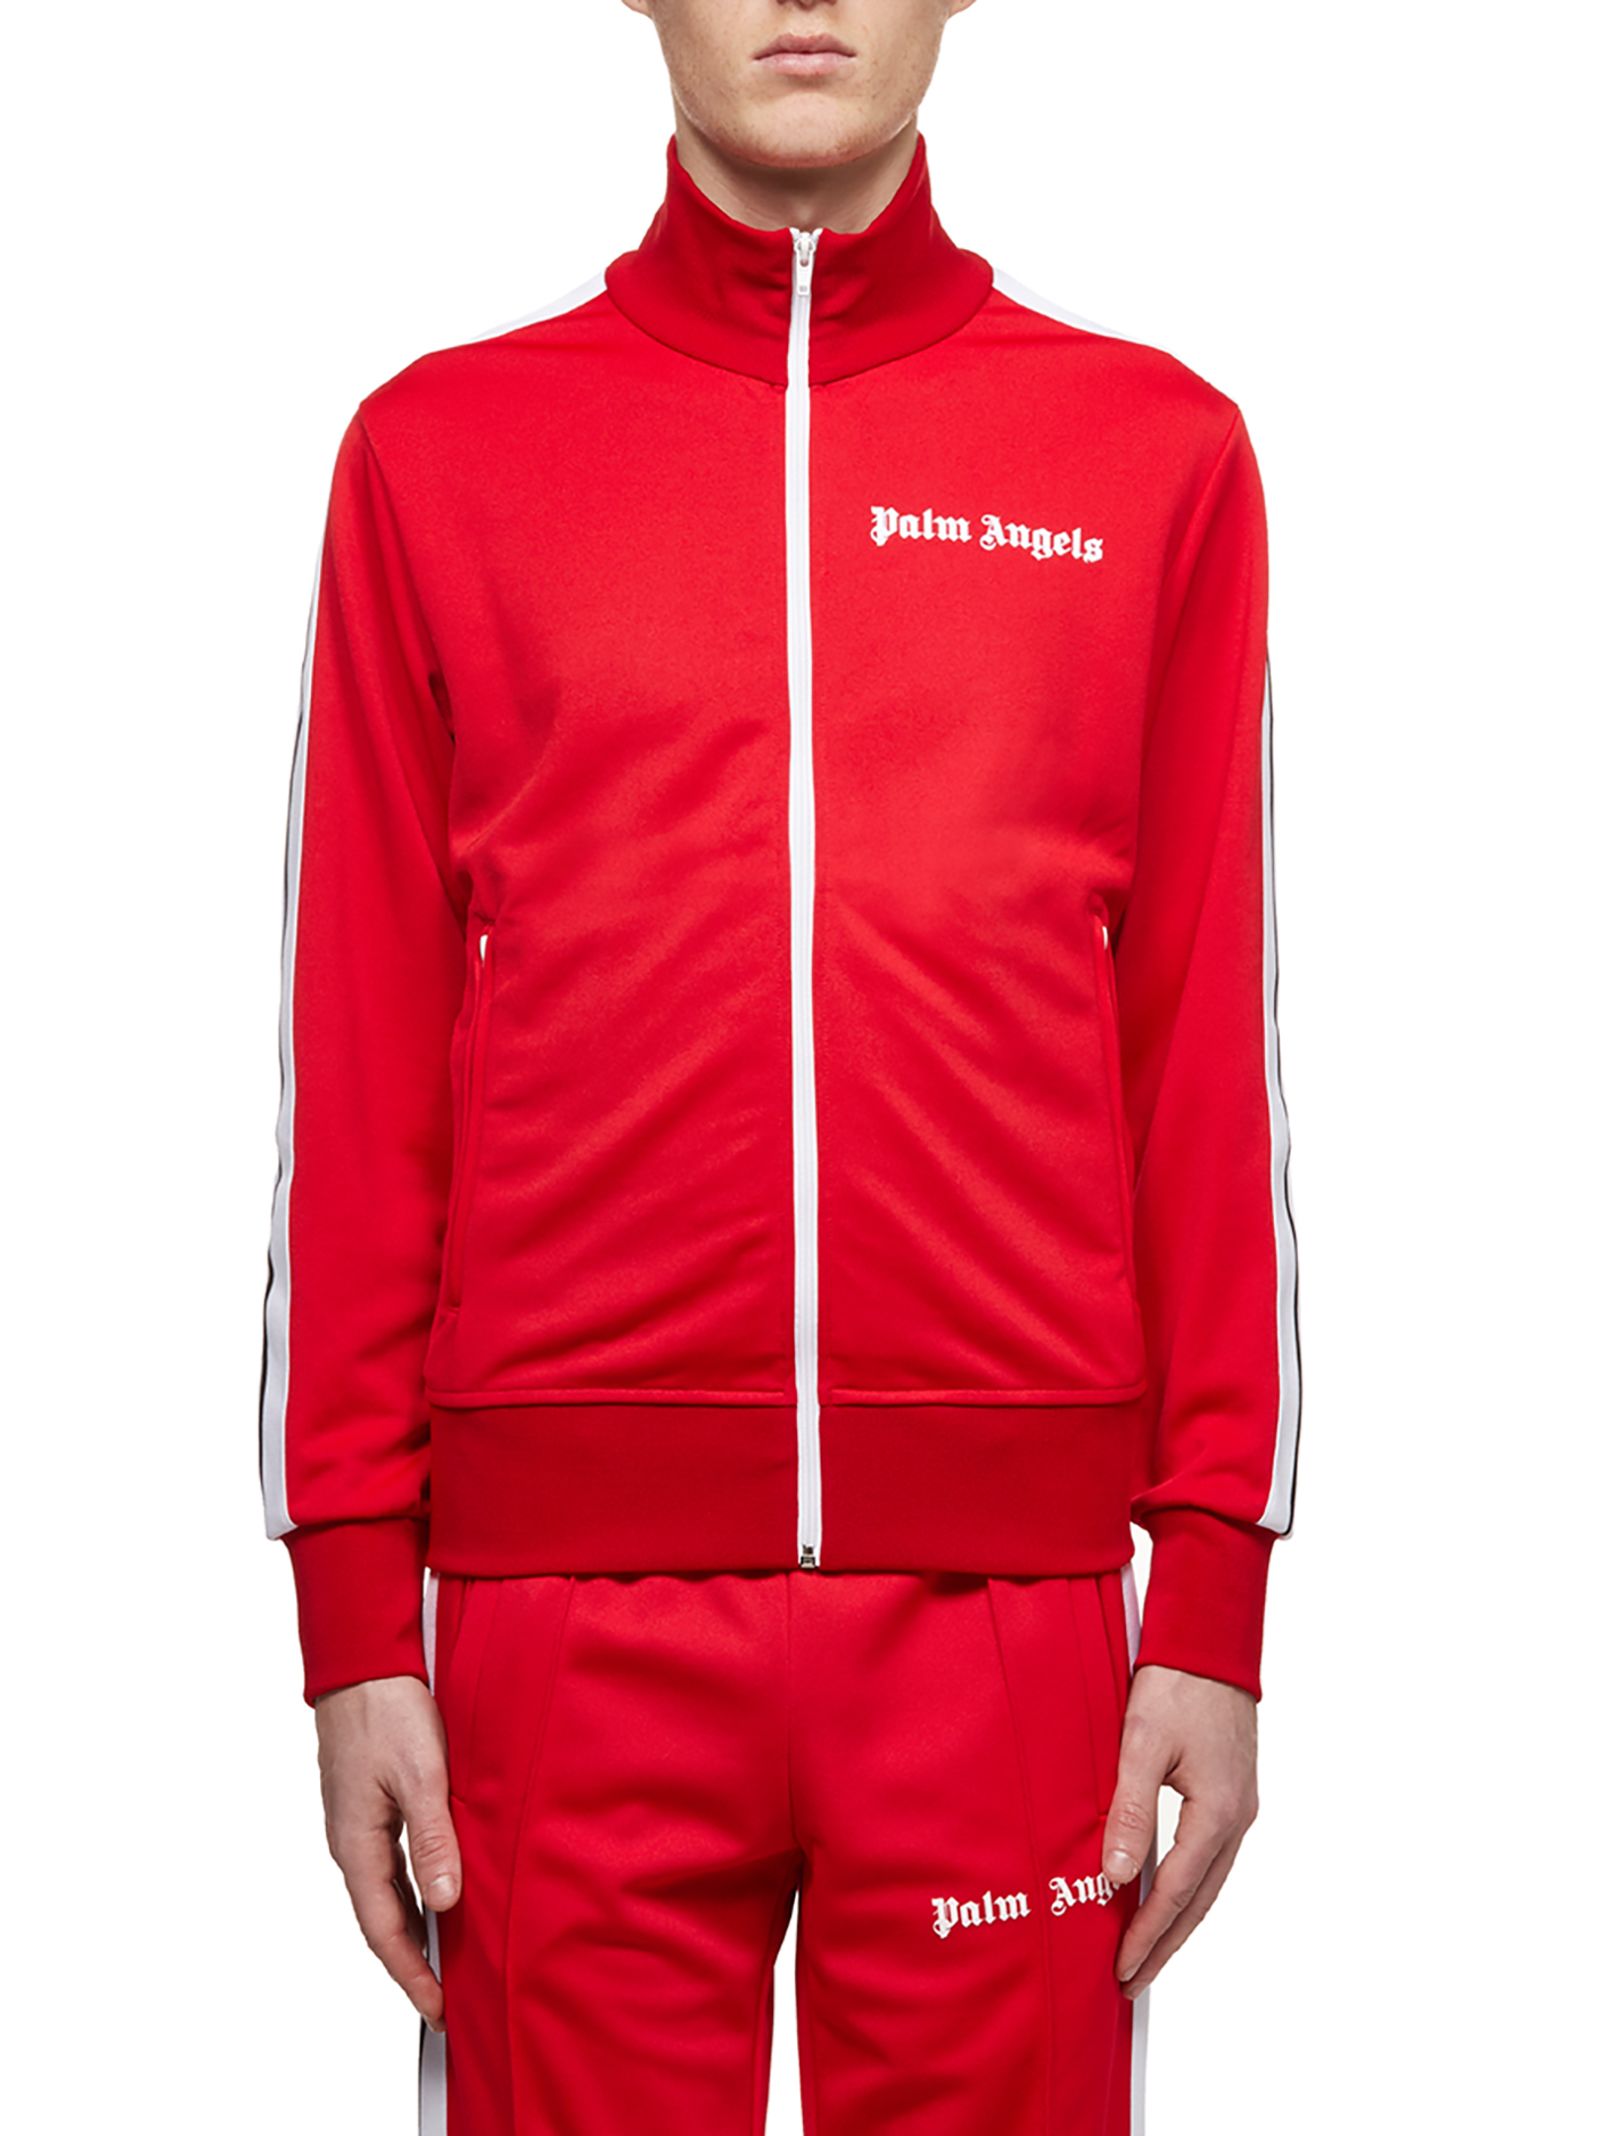 Palm Angels Palm Angels Jacket - Red white BLACK - 10825505 | italist